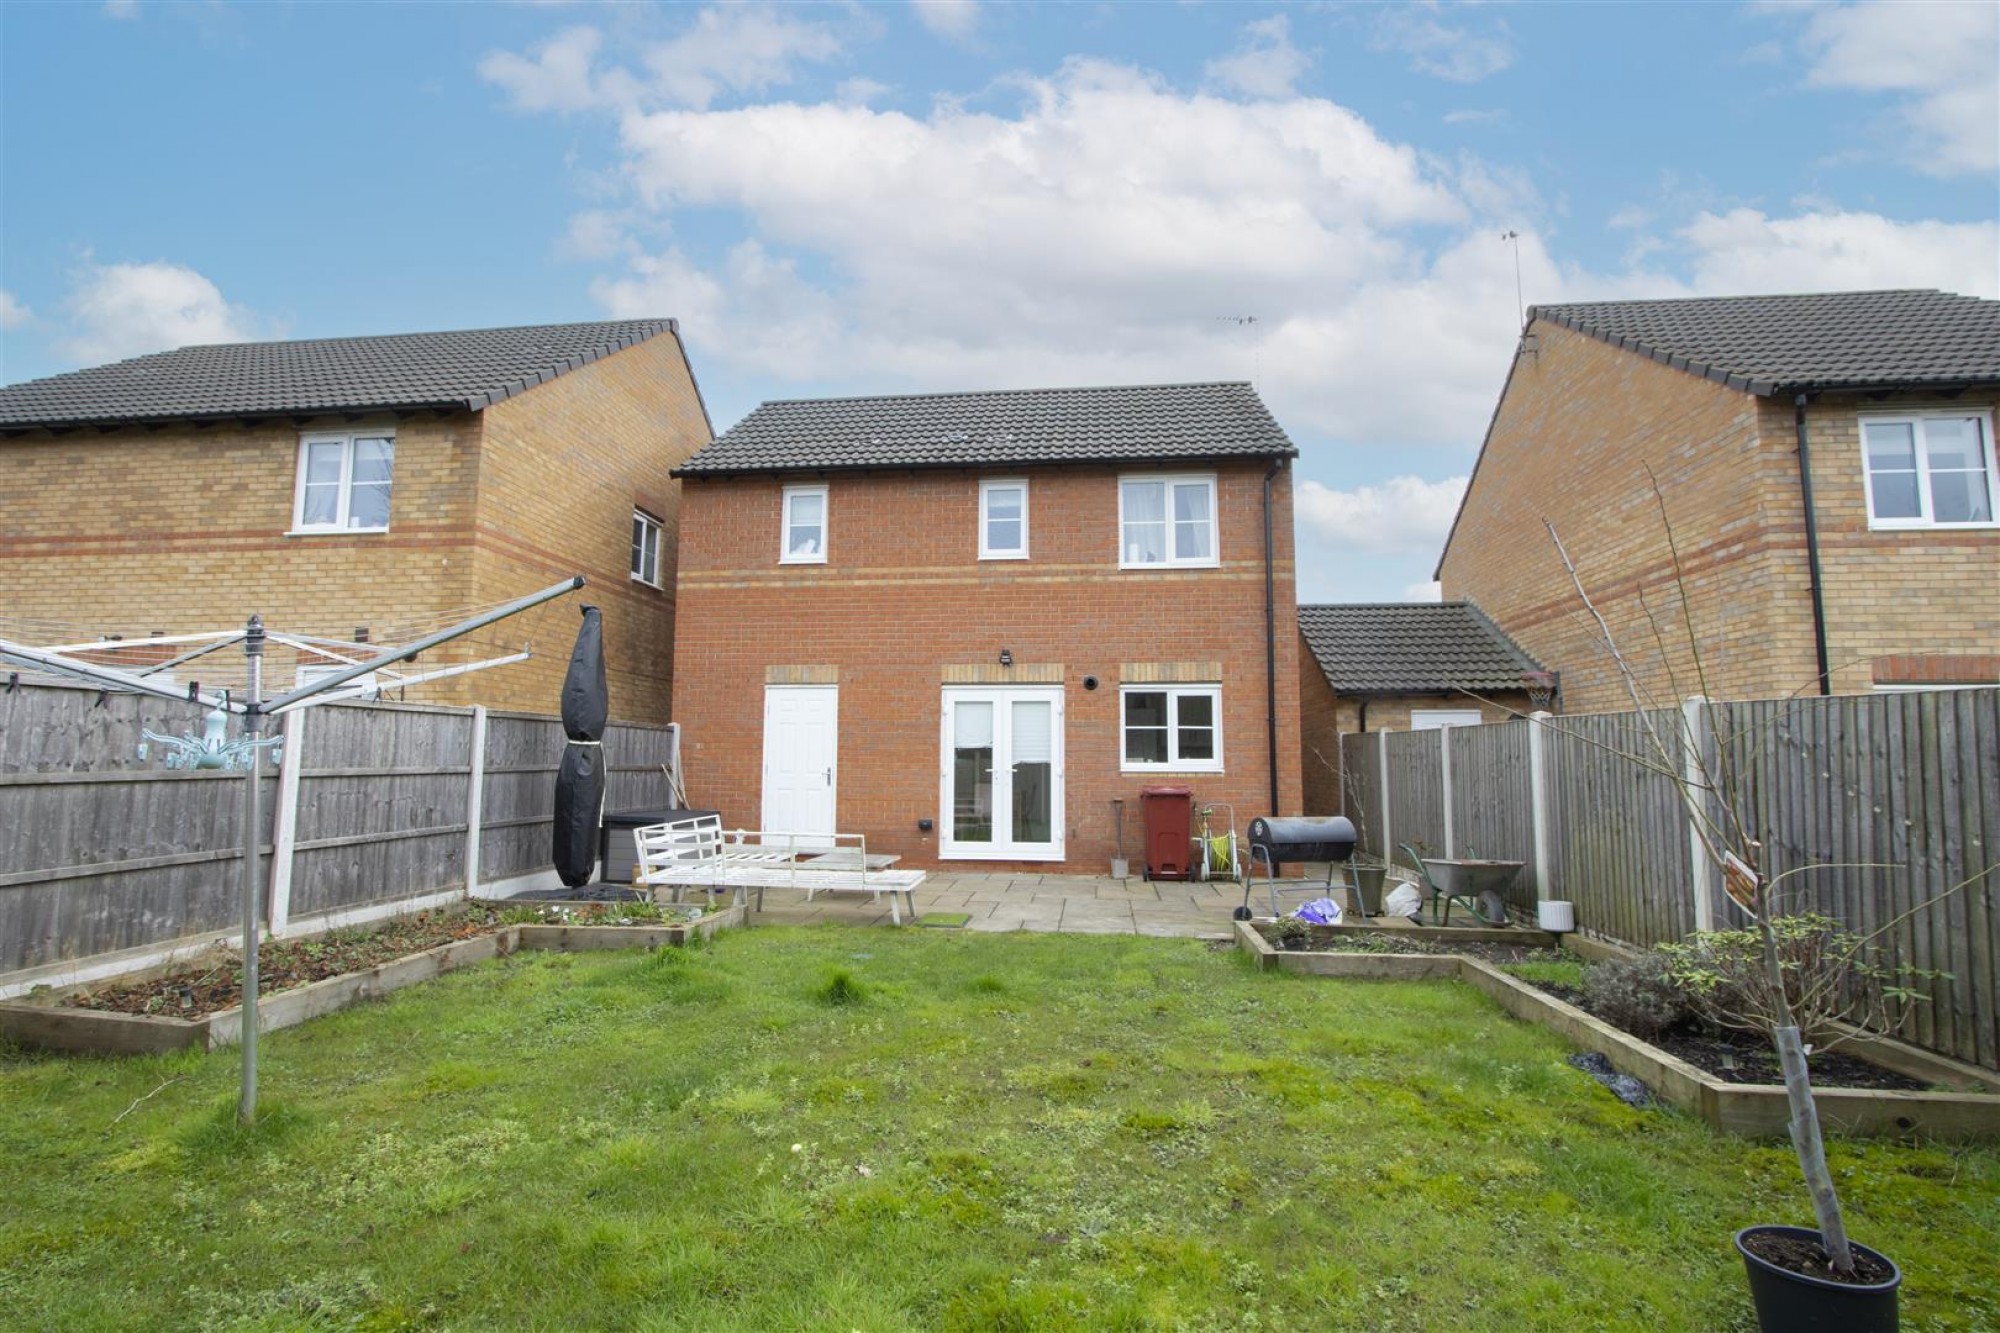 Moorspring Way, Old Tupton, Chesterfield